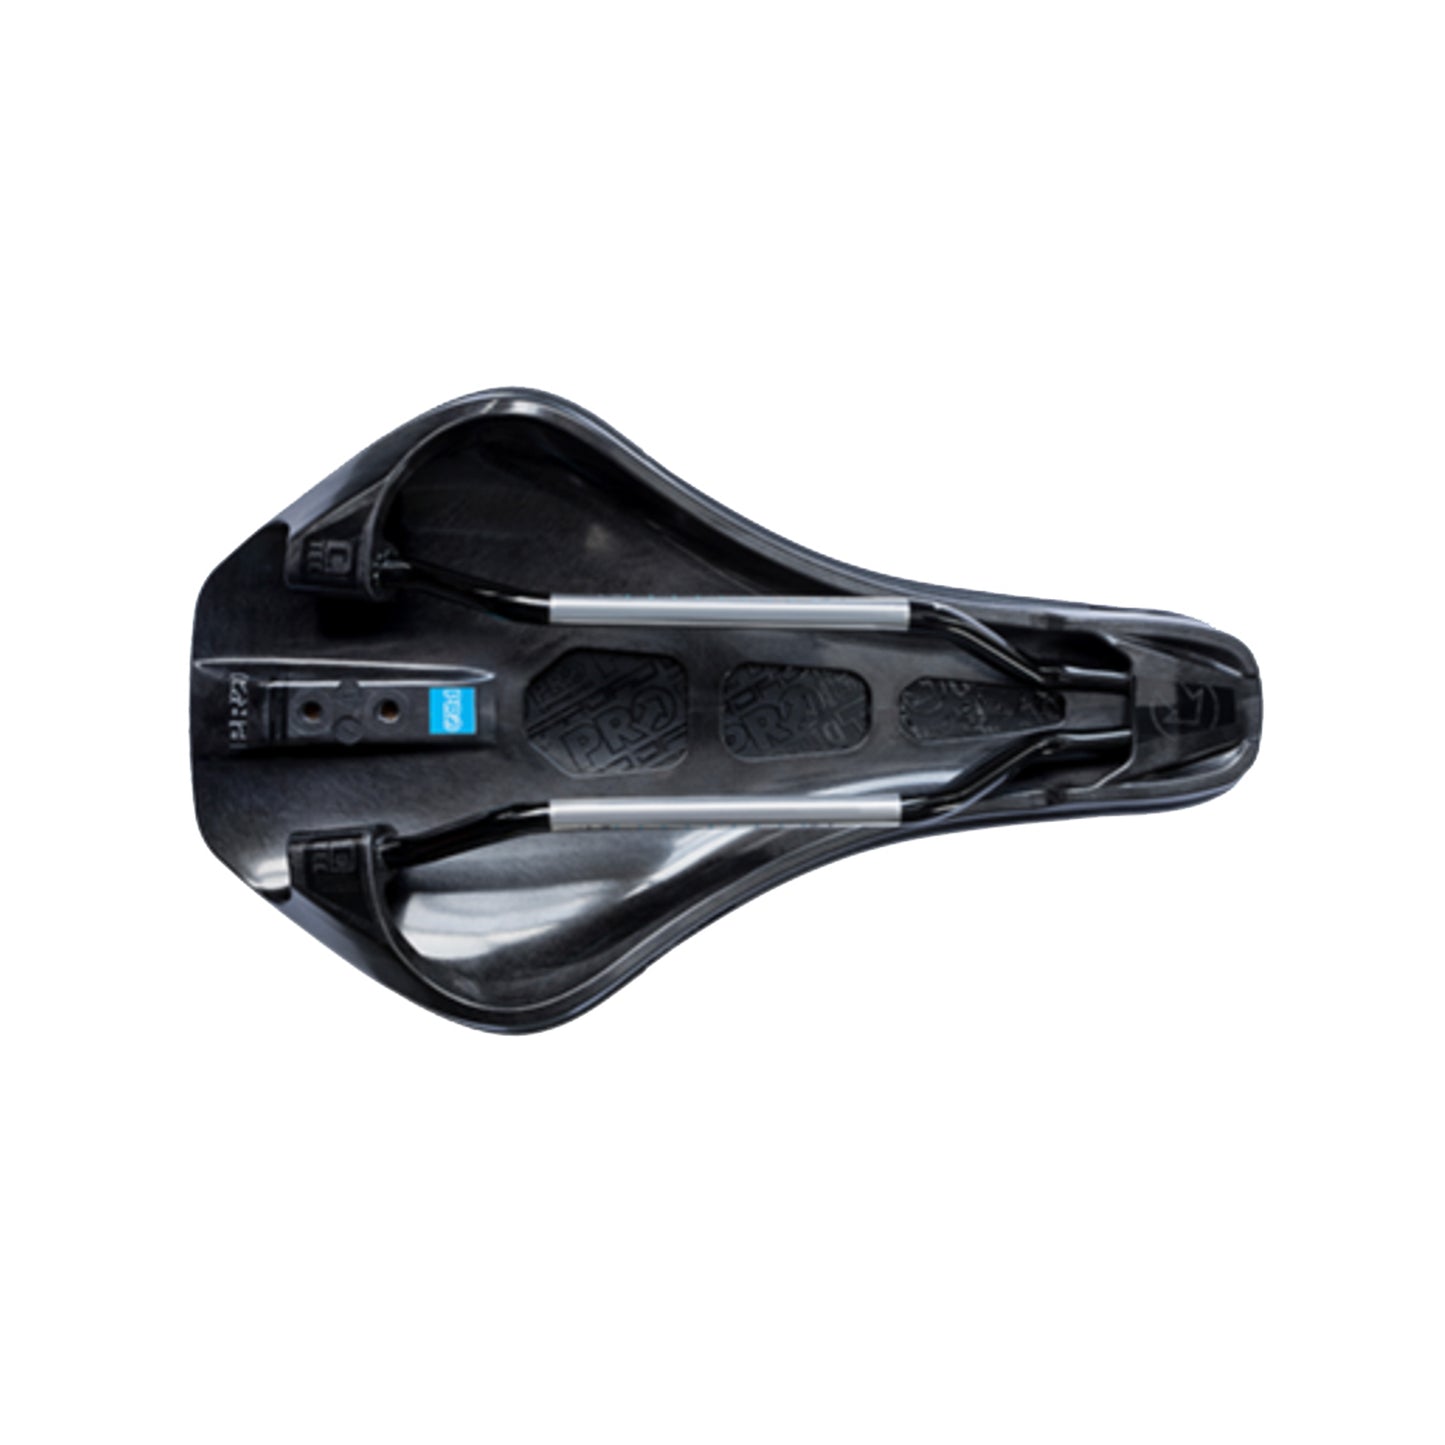 Pro Stealth Offroad Saddle